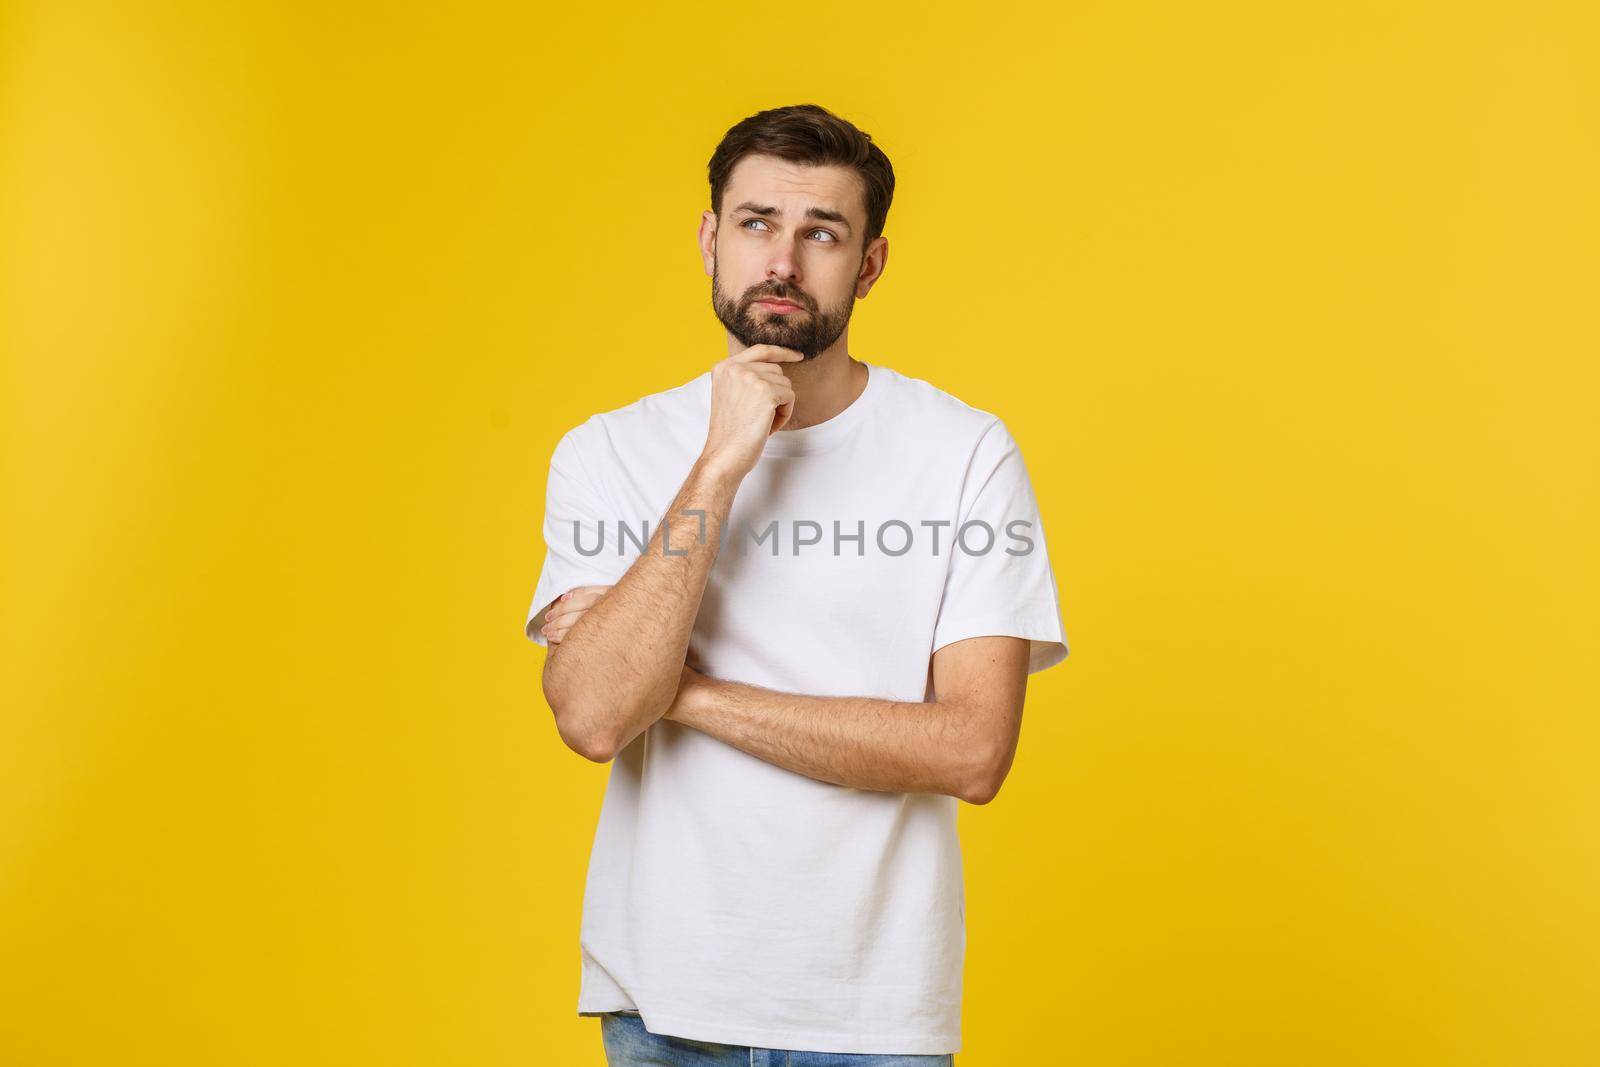 Pensive curious man looking up in thinking pose trying to make choice or decision isolated on yellow background